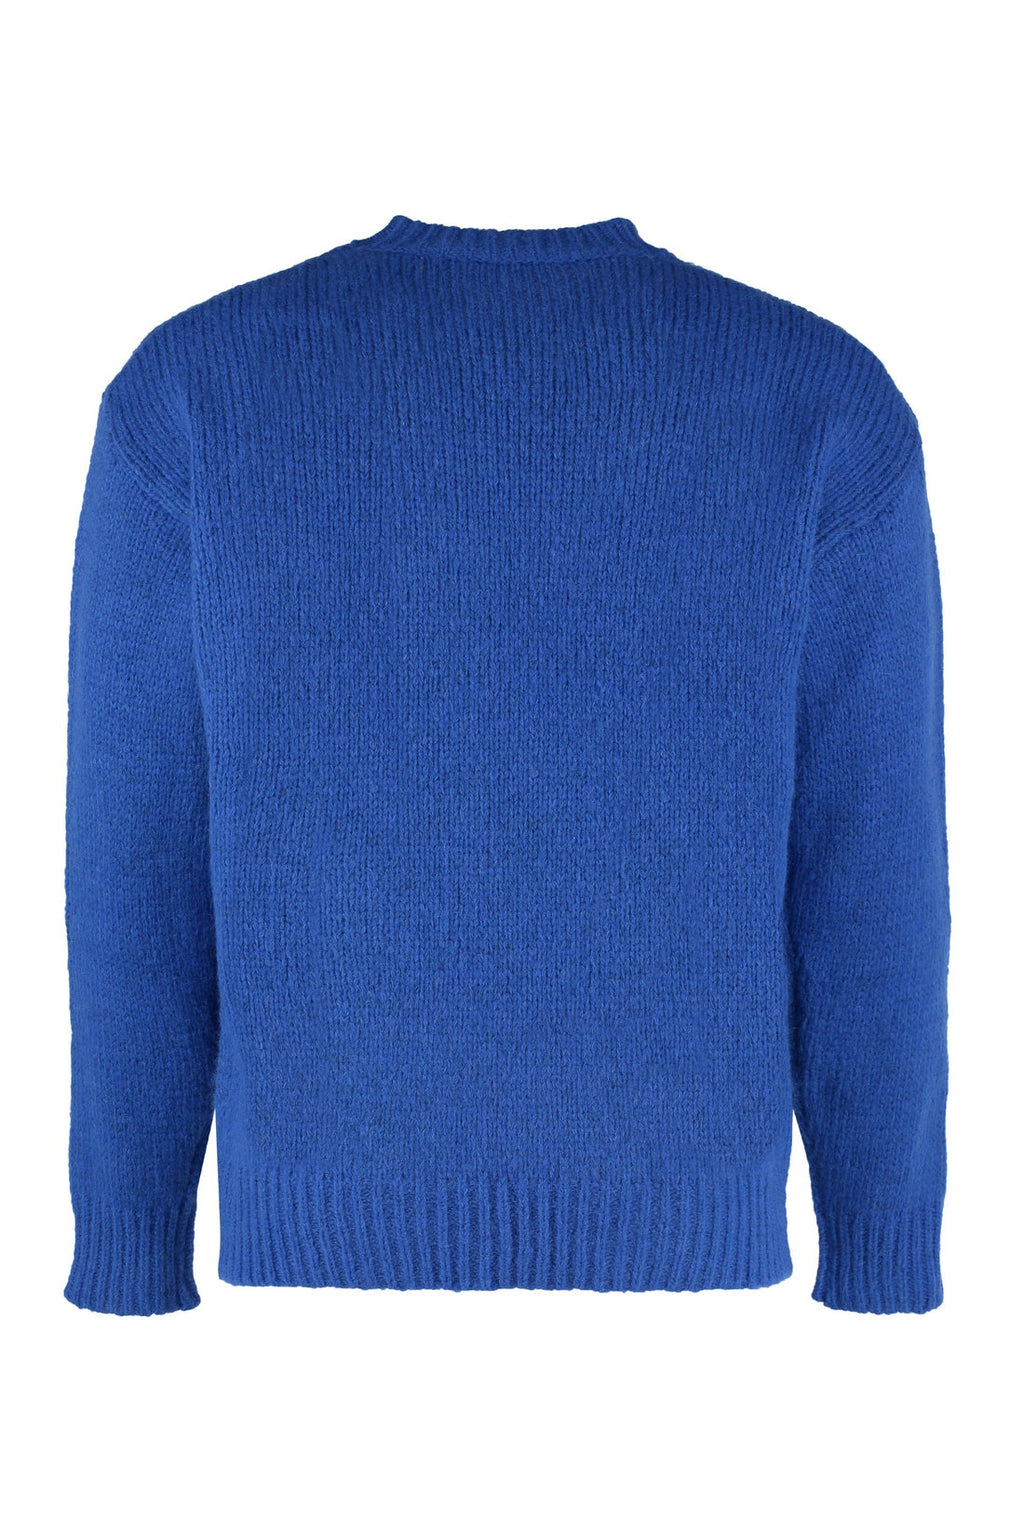 Roberto Collina-OUTLET-SALE-Ribbed crew-neck sweater-ARCHIVIST